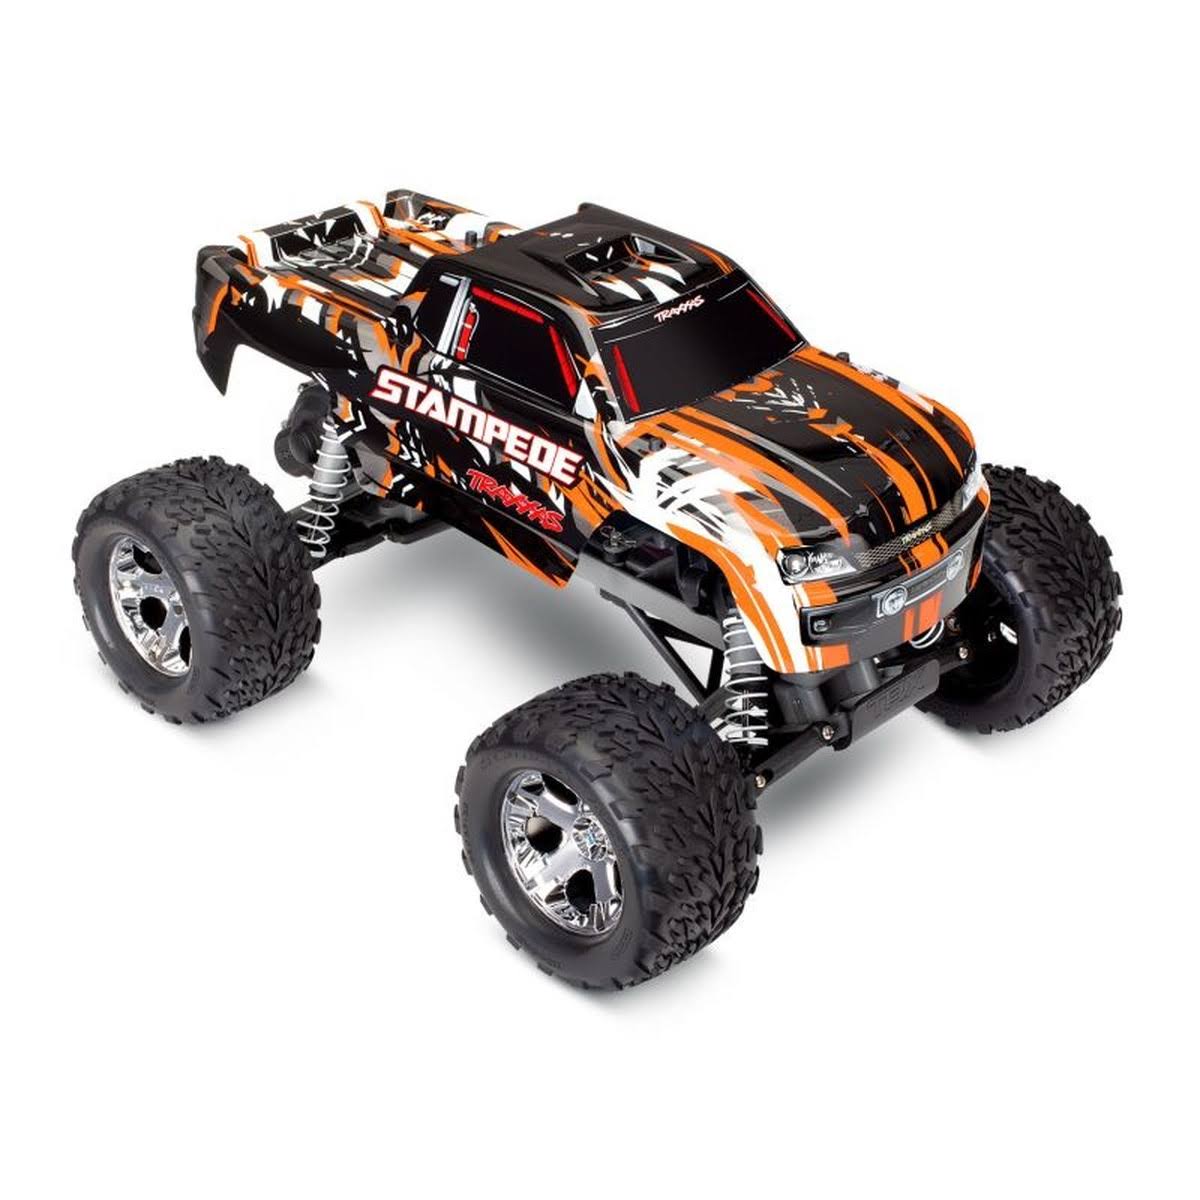 Traxxas Stampede 1/10 2wd XL-5 NO BATTERY/CHARGER - Blue